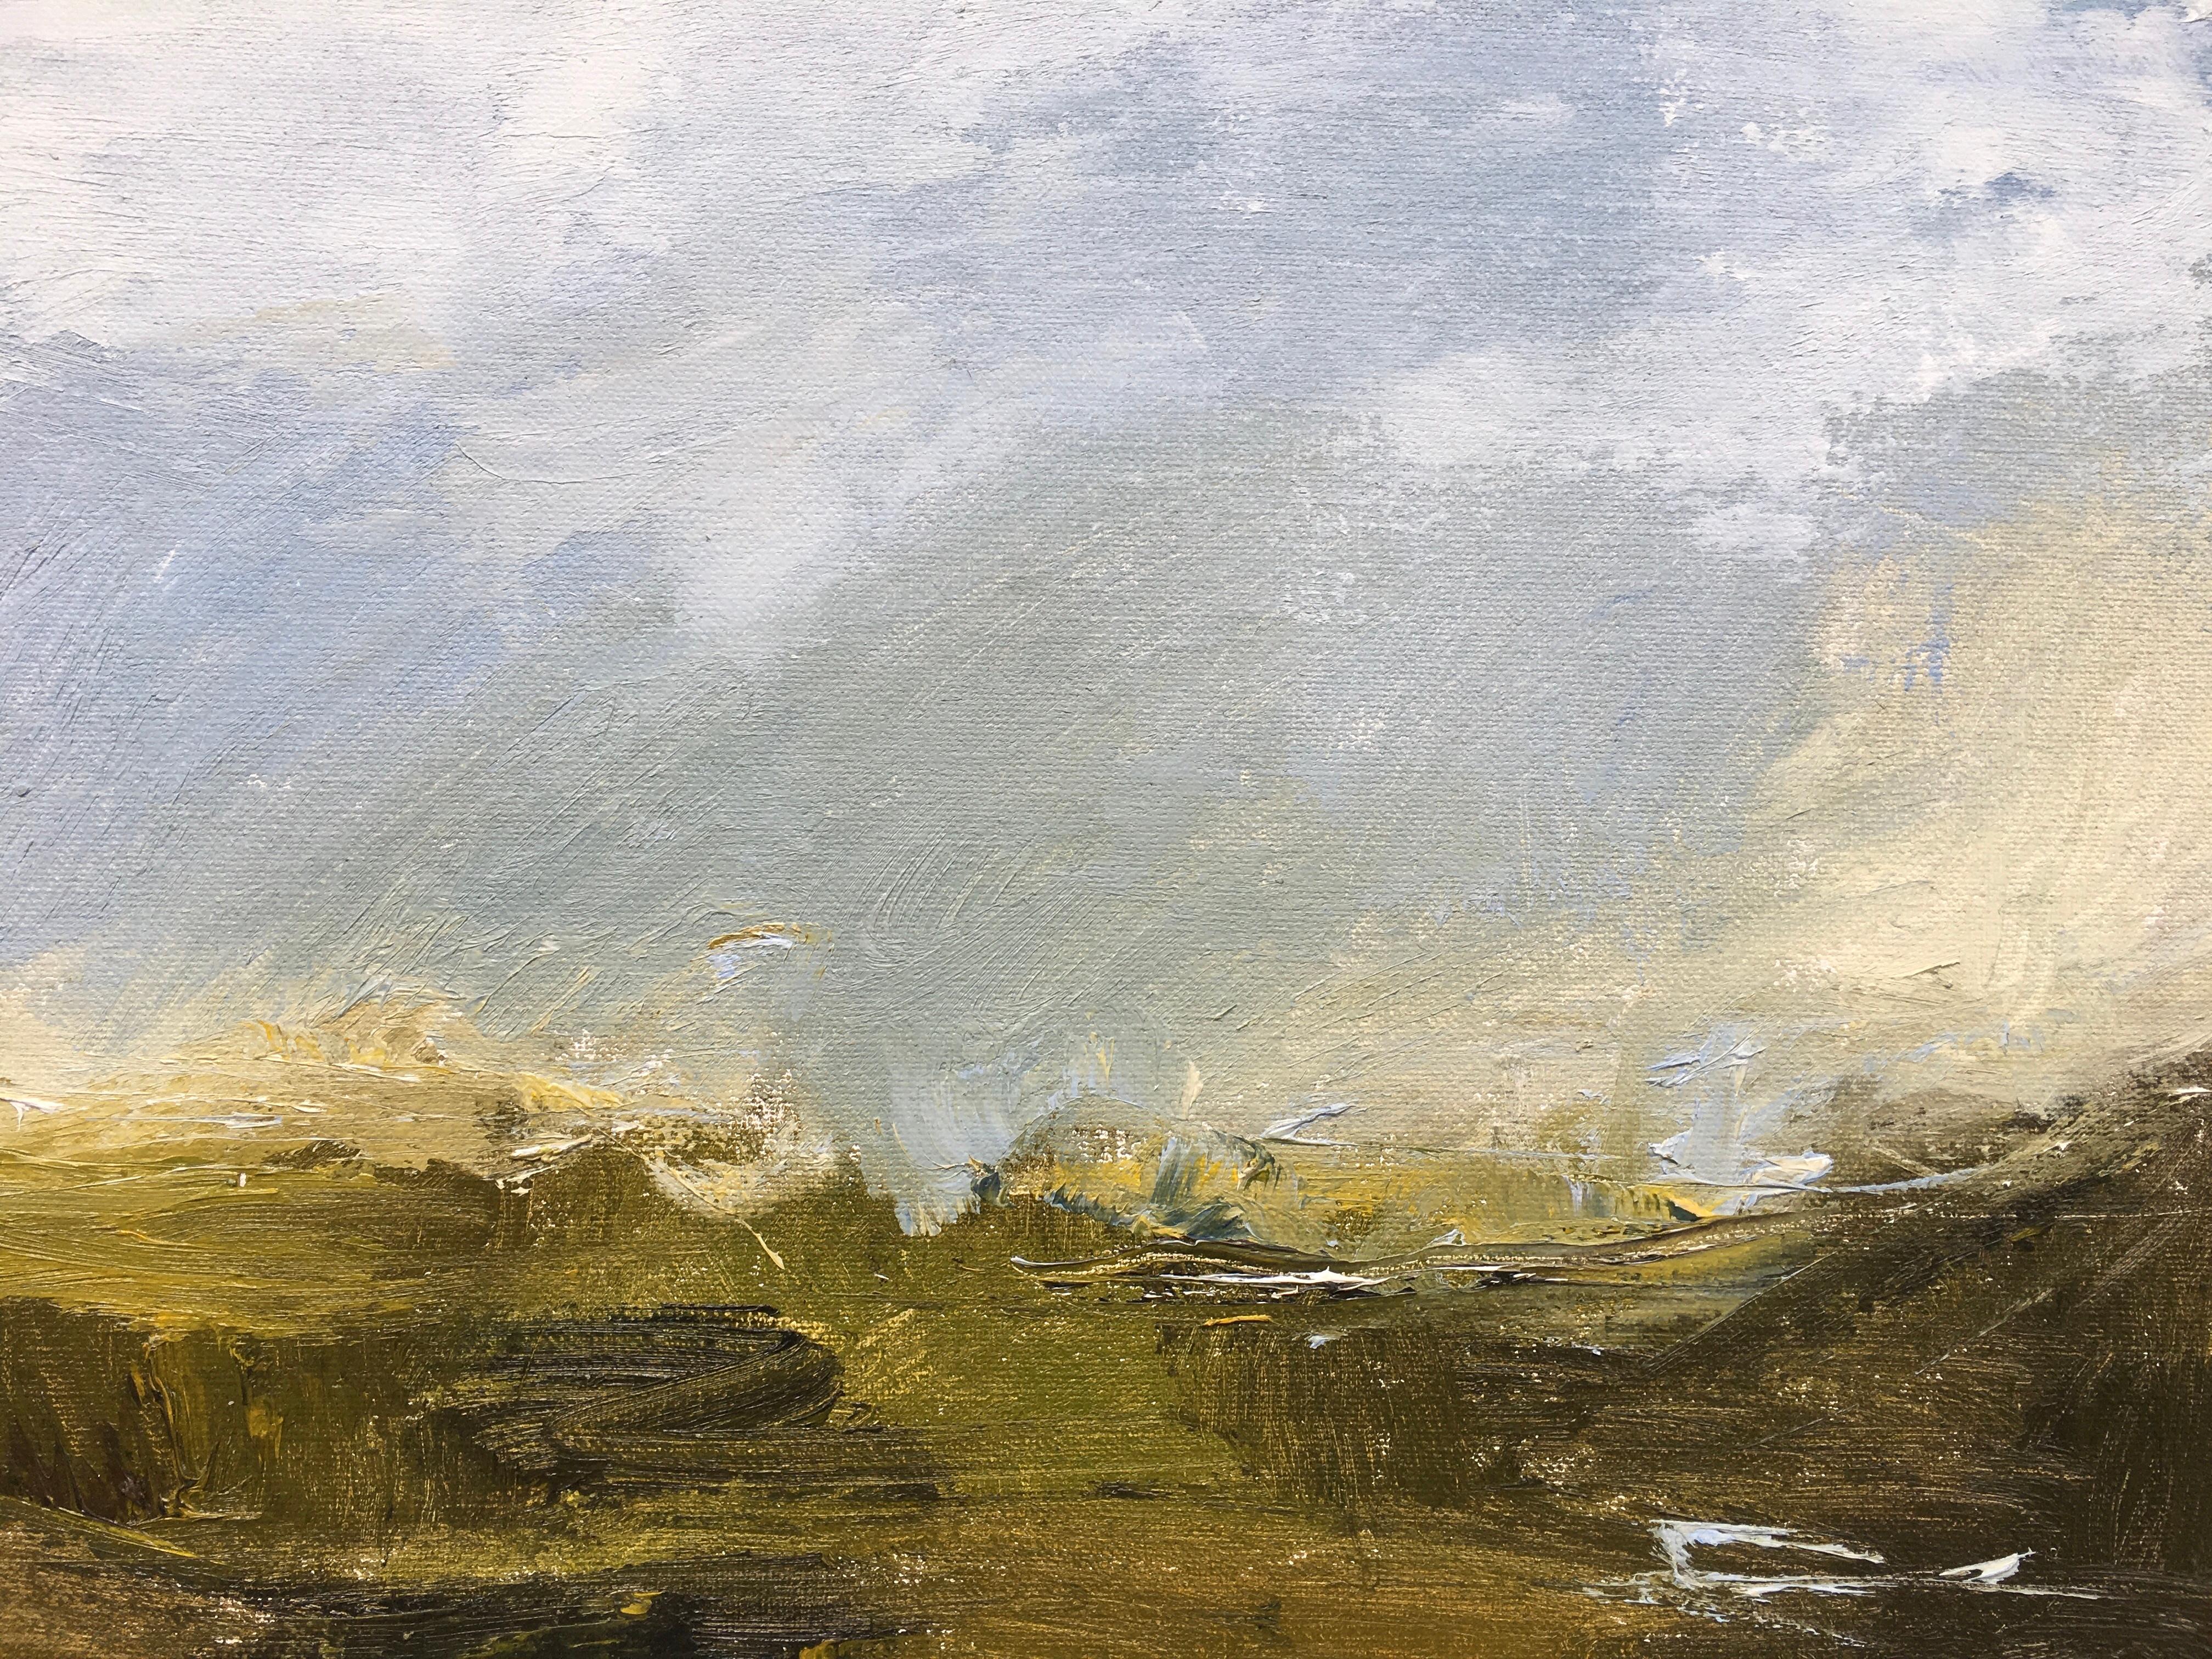 Landscape Drenched in Green, original art, landscape art, Dartmoor art - Gray Landscape Painting by Maria Floyd